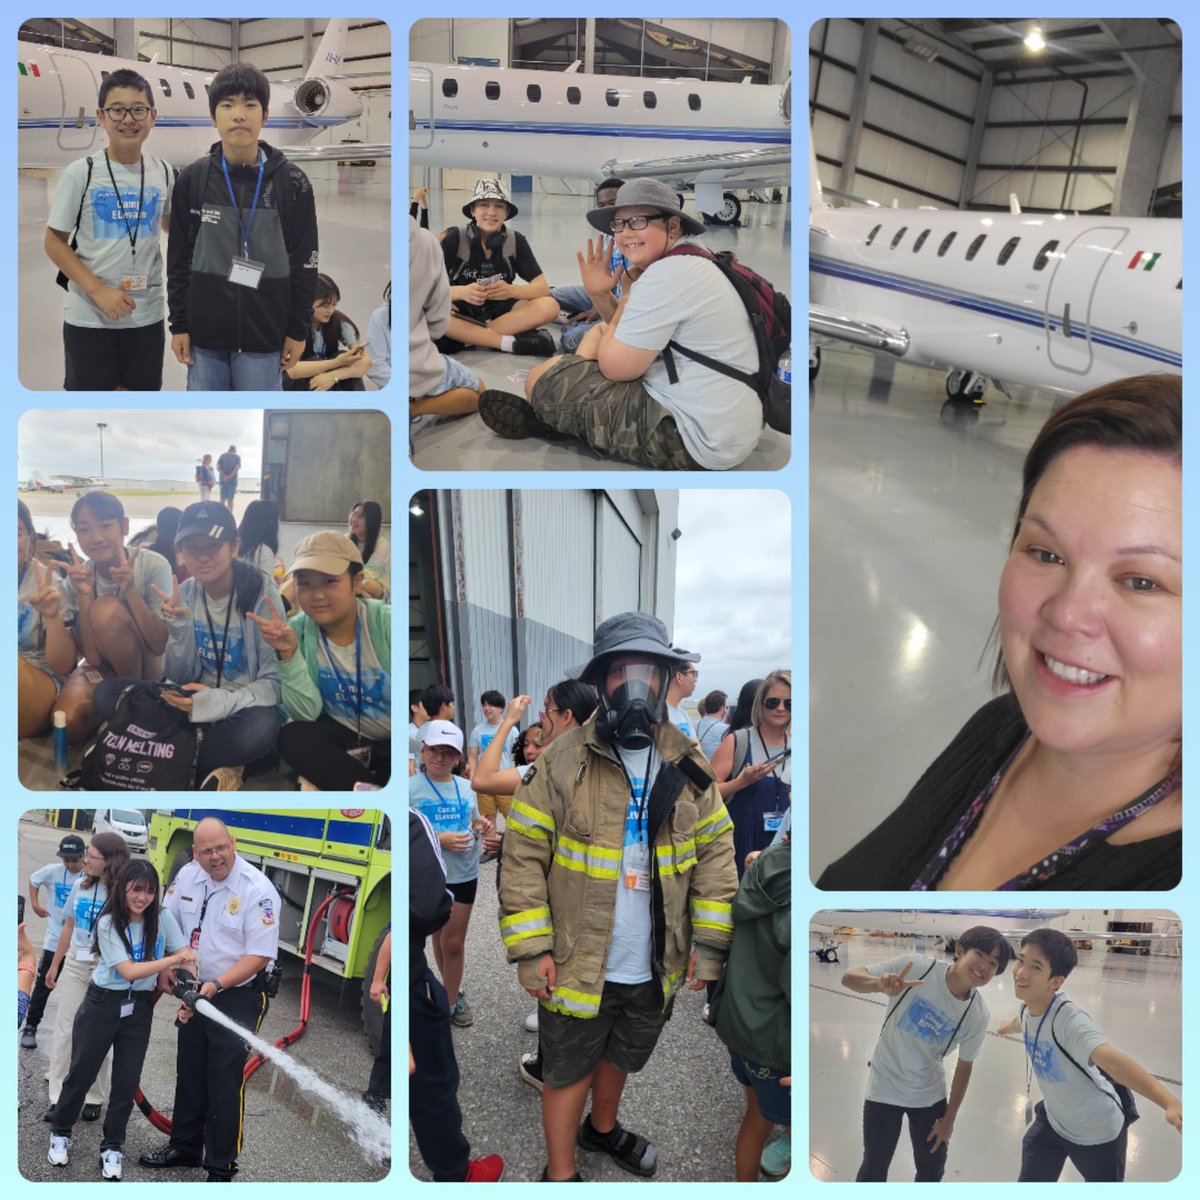 What a fun day subbing with the secondary EL Camp today and a trip to @flyquesthsv learning about planes and the cool jobs they have!! #MadisonESL #mcslearn